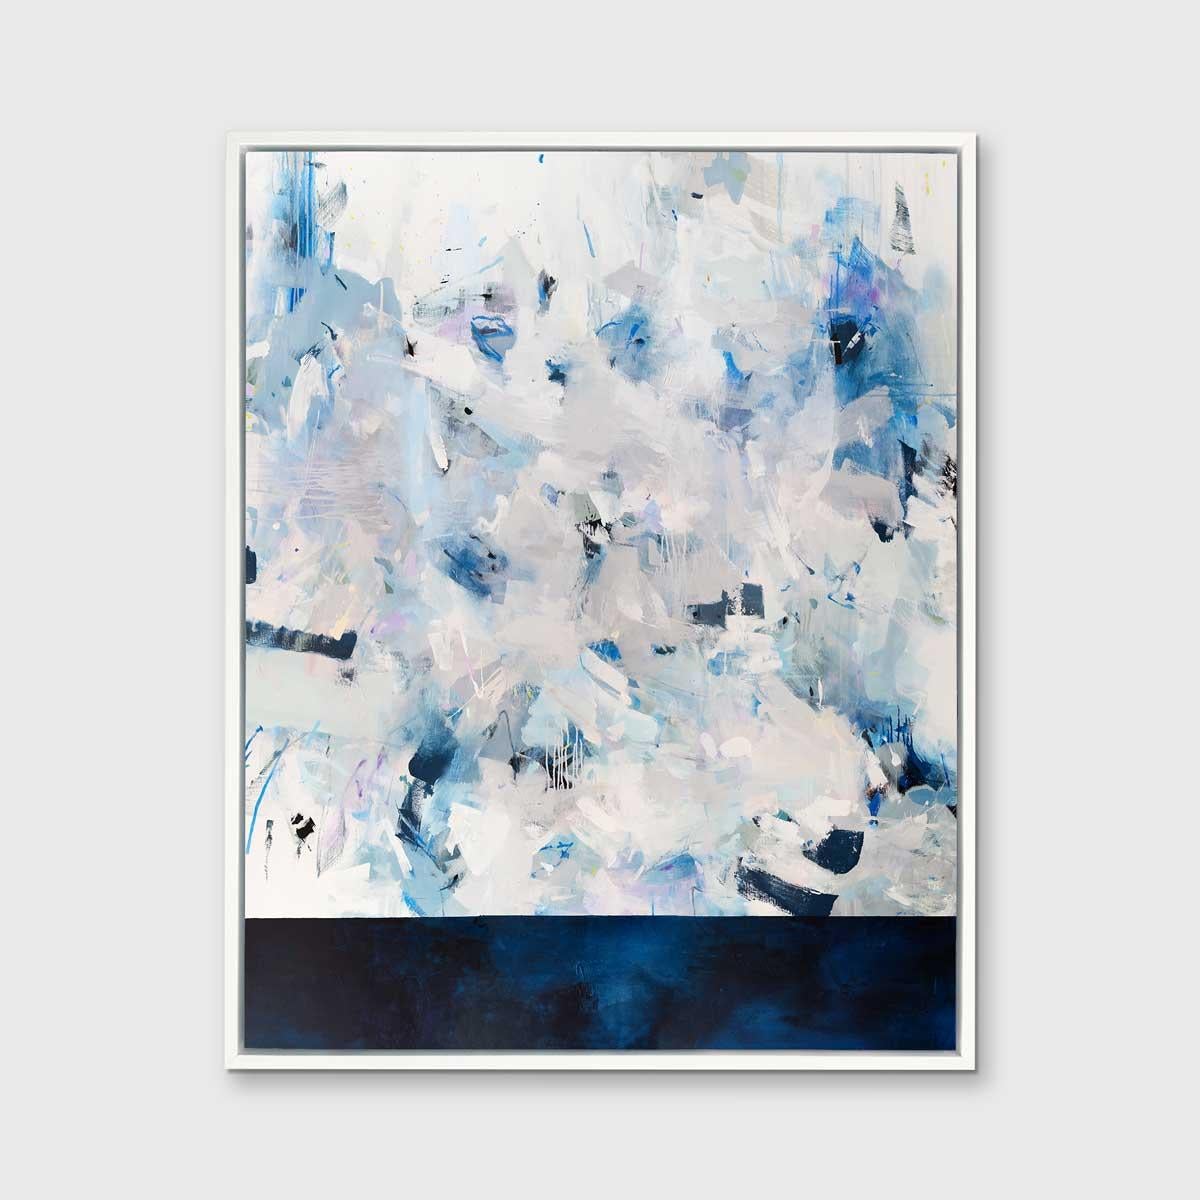 This limited edition abstract giclee print by Kelly Rossetti features a cool blue and white palette. The bottom portion of the composition is a deep, midnight blue, which is balanced by the expressive strokes in grey, white, blue, and subtle pale